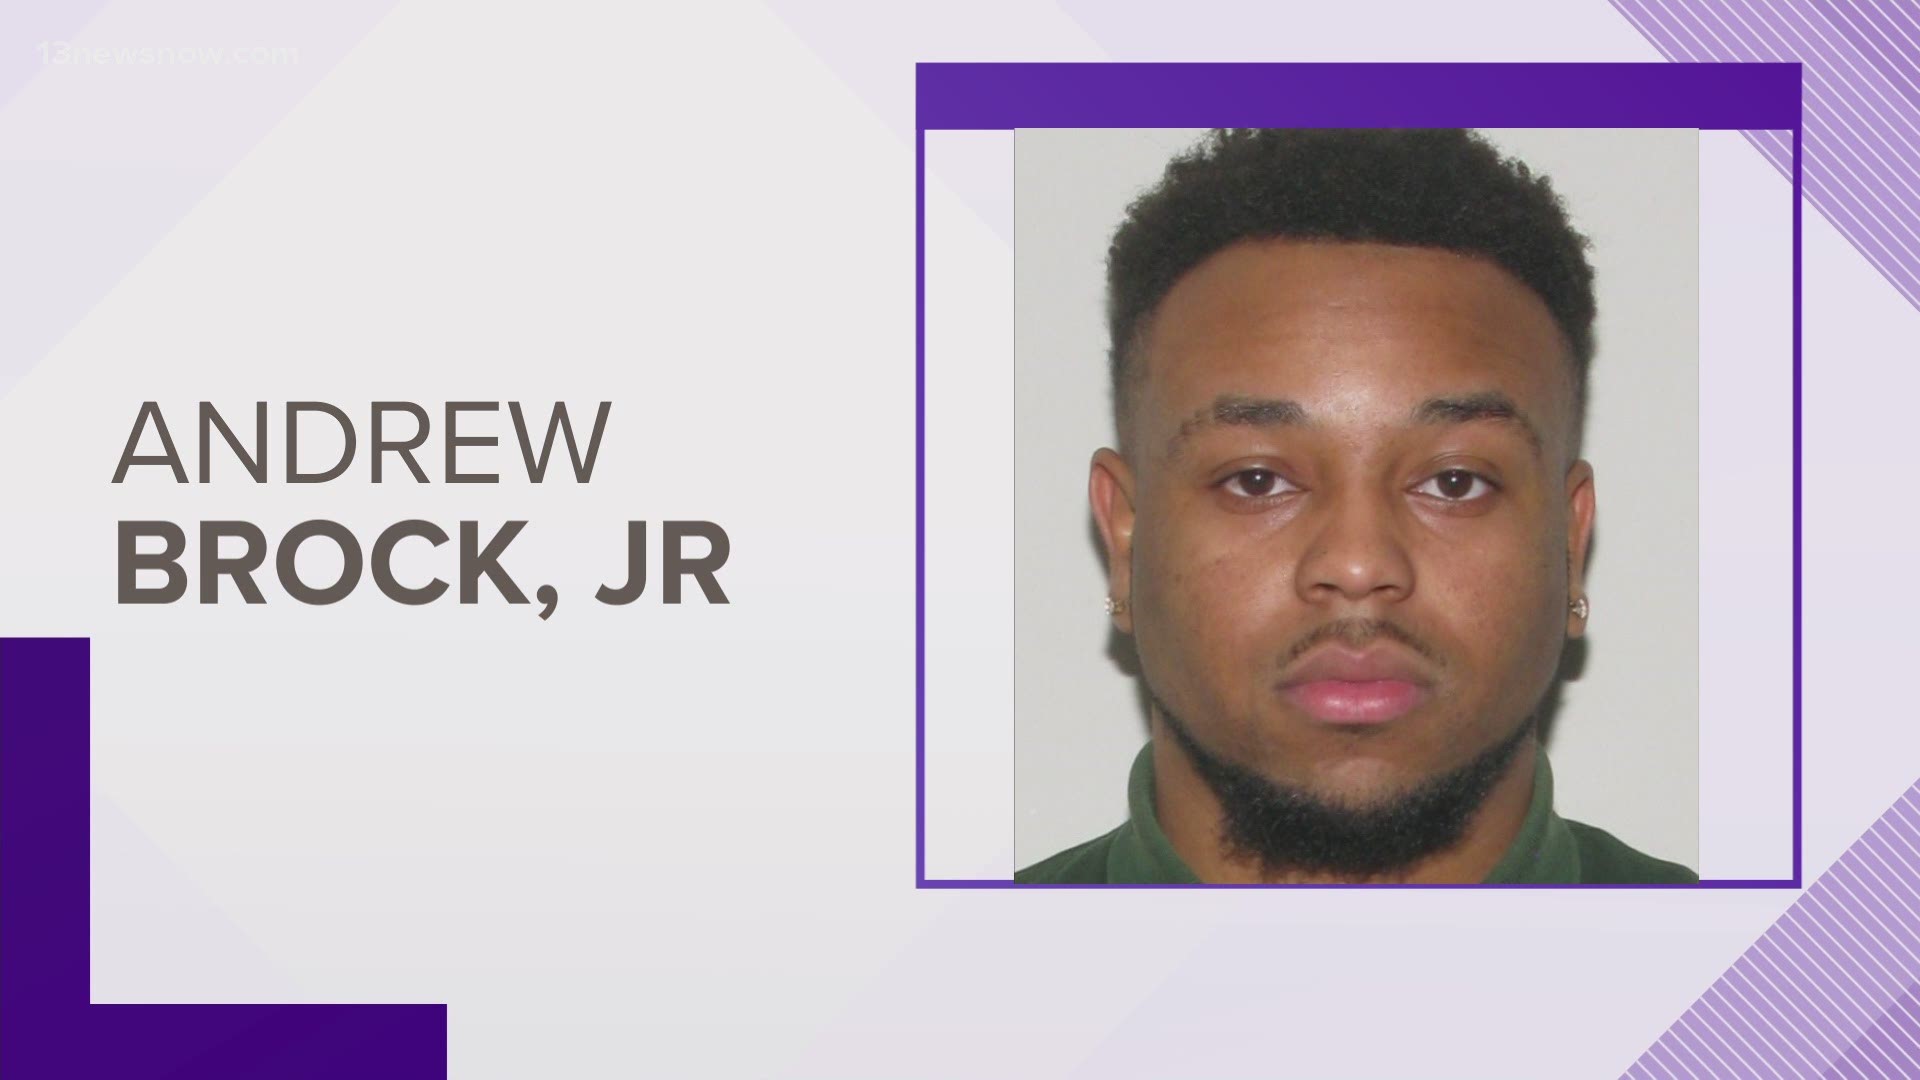 Andrew Brock Jr. was hurt during an exchange of gunfire with police. Brock was wanted after he broke into his ex-girlfriend's apartment in Smithfield and shot a man.